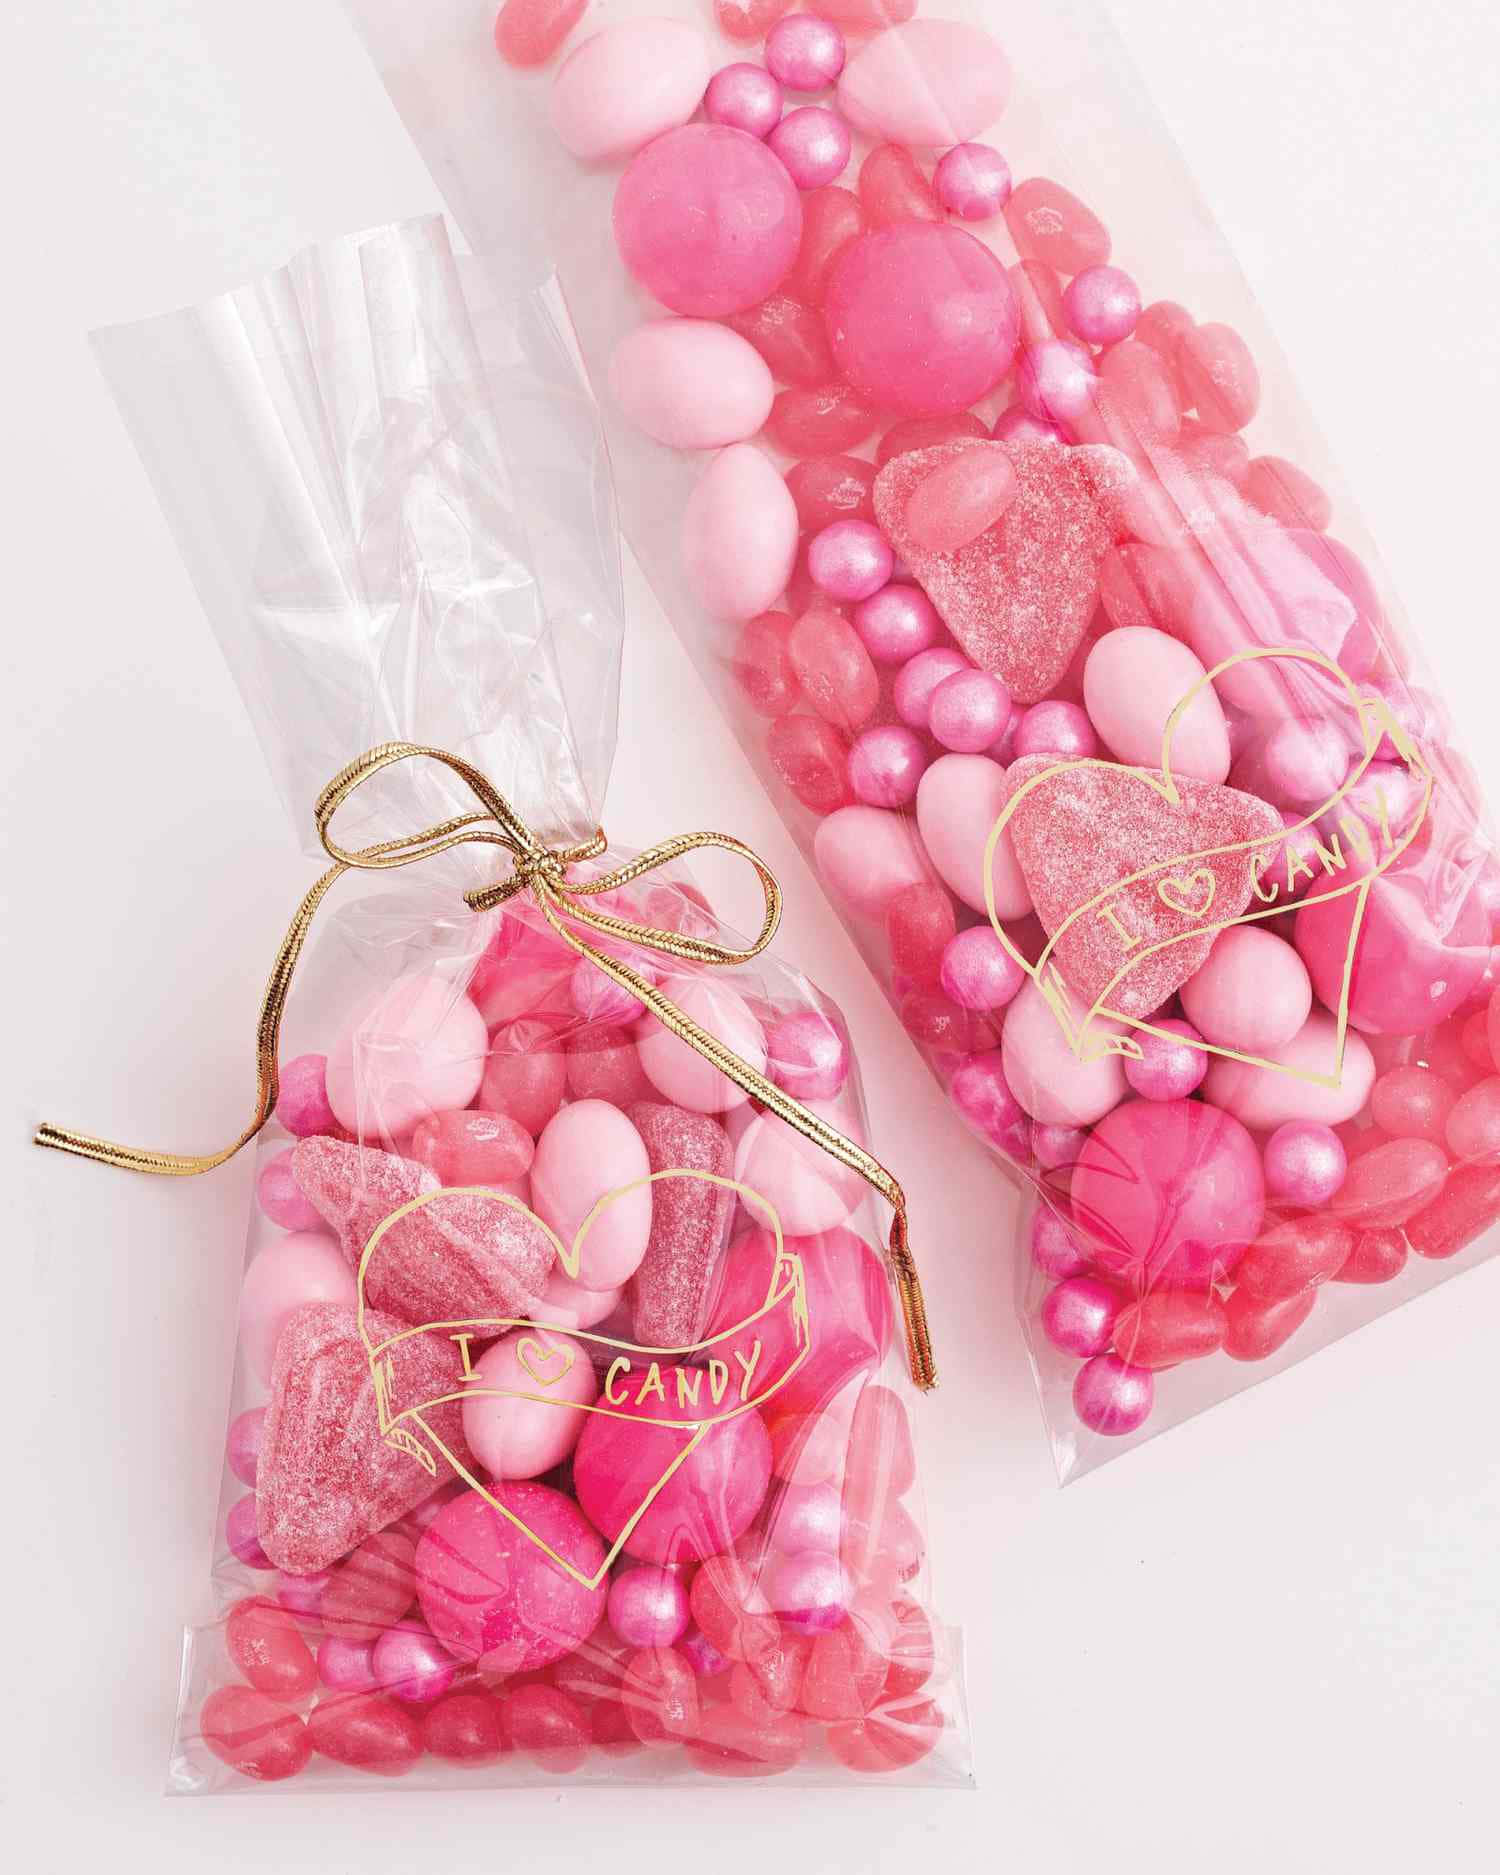 Delicious Pink Candies to Satisfy Your Sweet Tooth Wallpaper